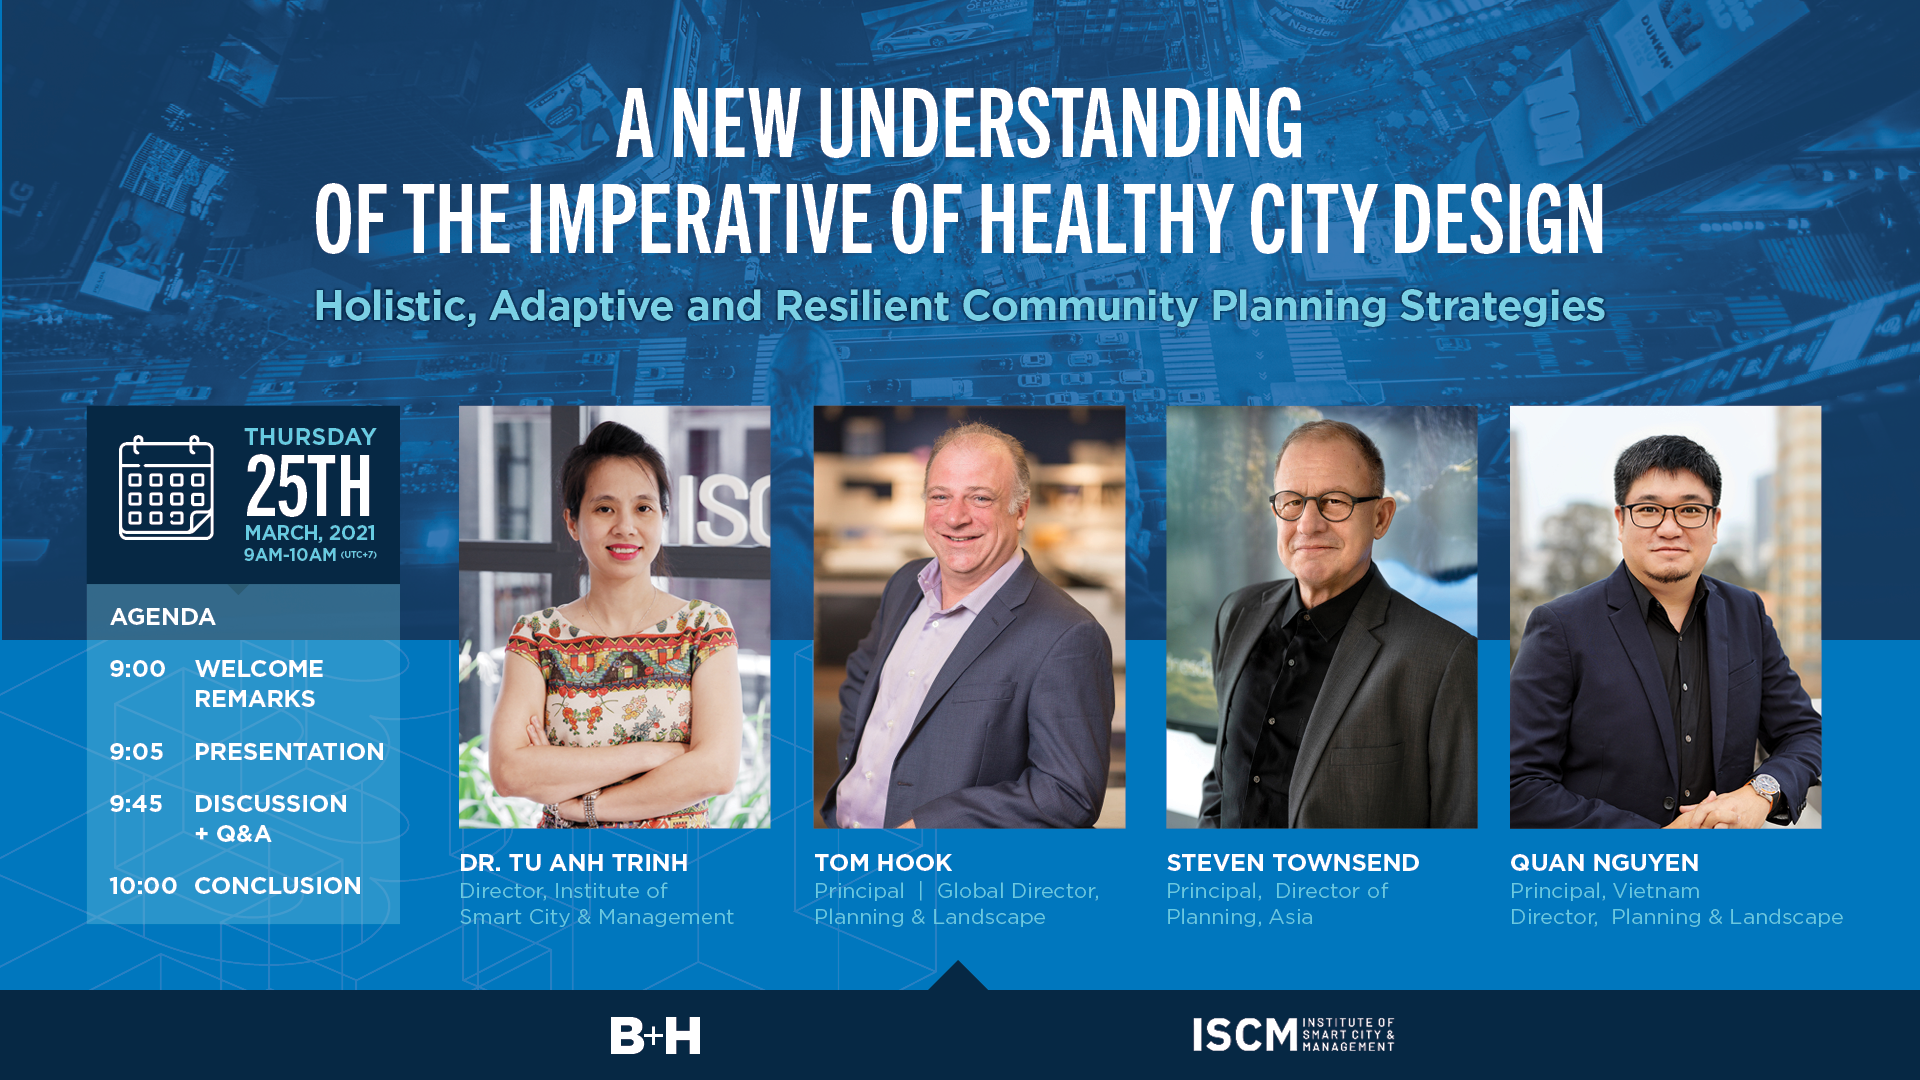 Webinar “a New Understanding of the Imperative of Healthy City Design"